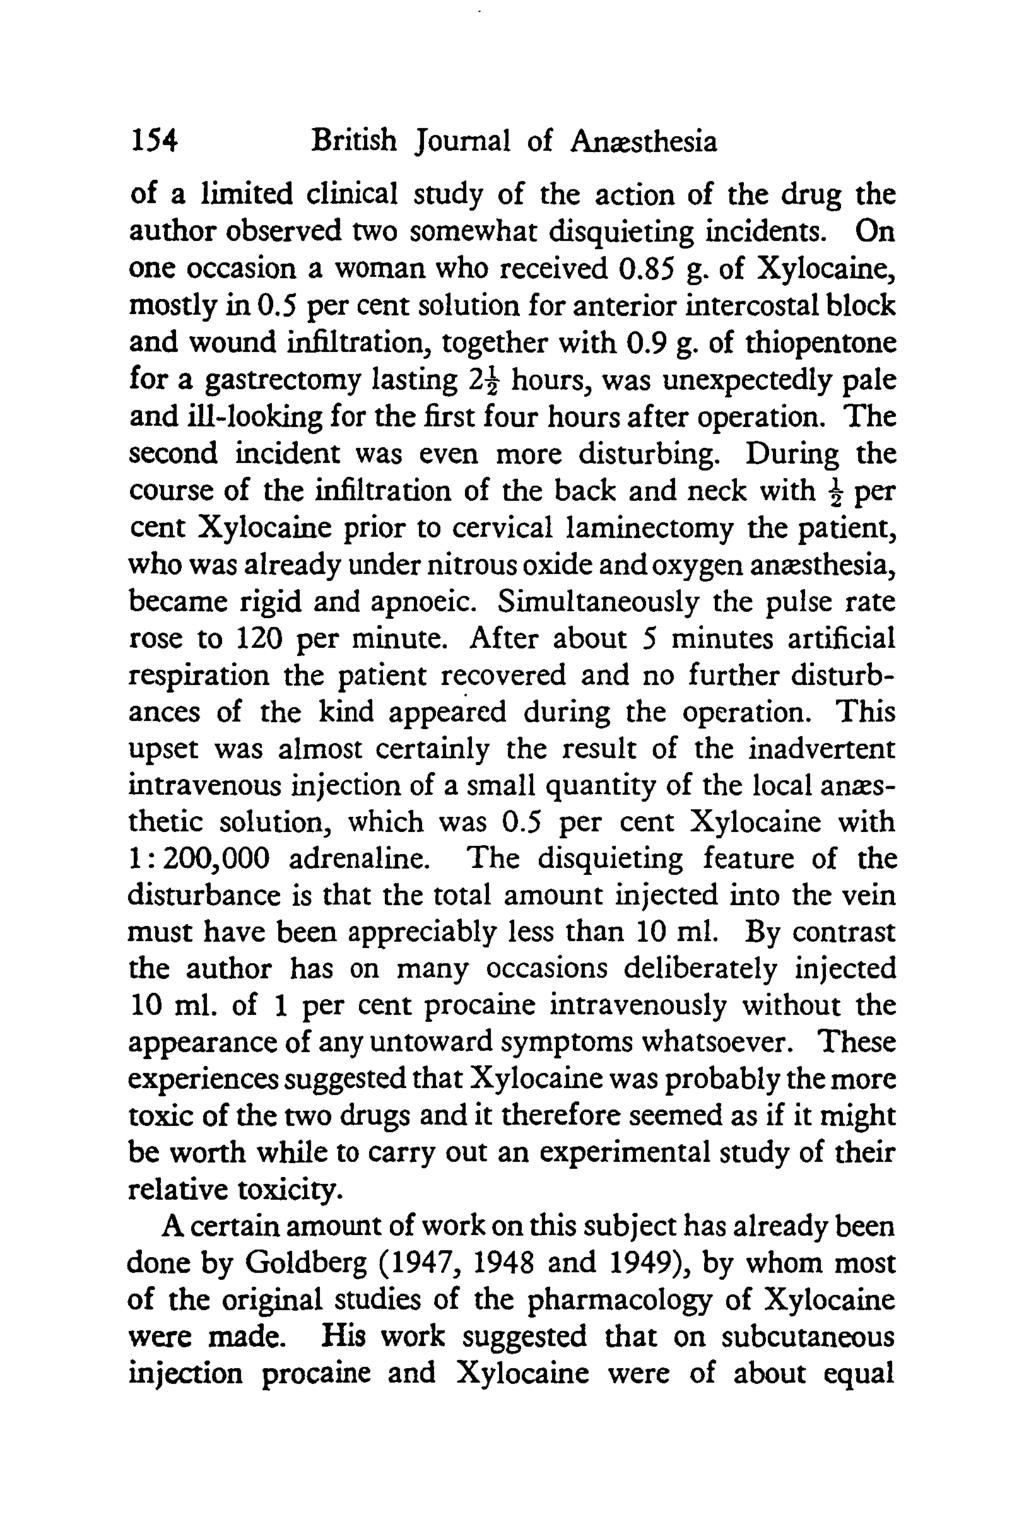 154 British Journal of Anaesthesia of a limited clinical study of the action of the drug the author observed two somewhat disquieting incidents. On one occasion a woman who received.85 g.